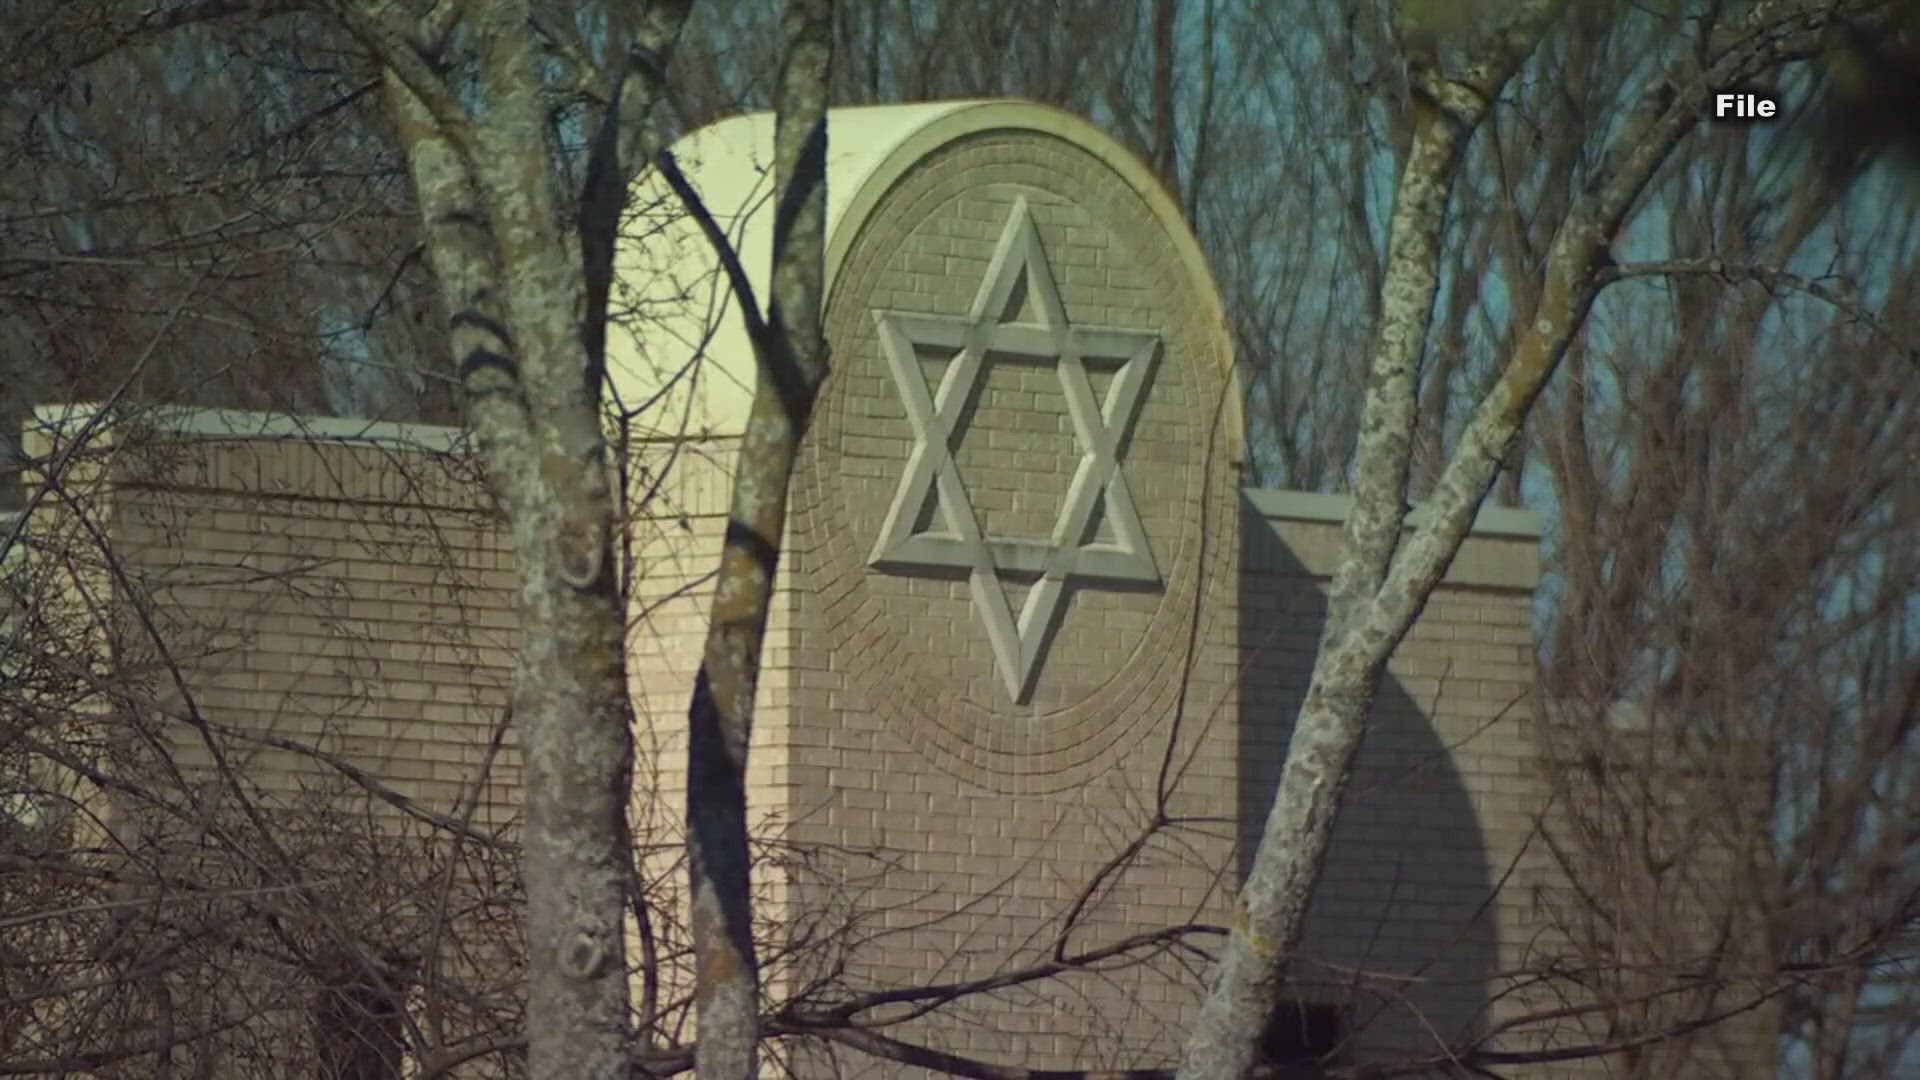 Jackie Nirenberg with the Central Texas region of the Anti Defamation League told 6 News antisemitic has been reported in Central Texas this year.​​​​​​